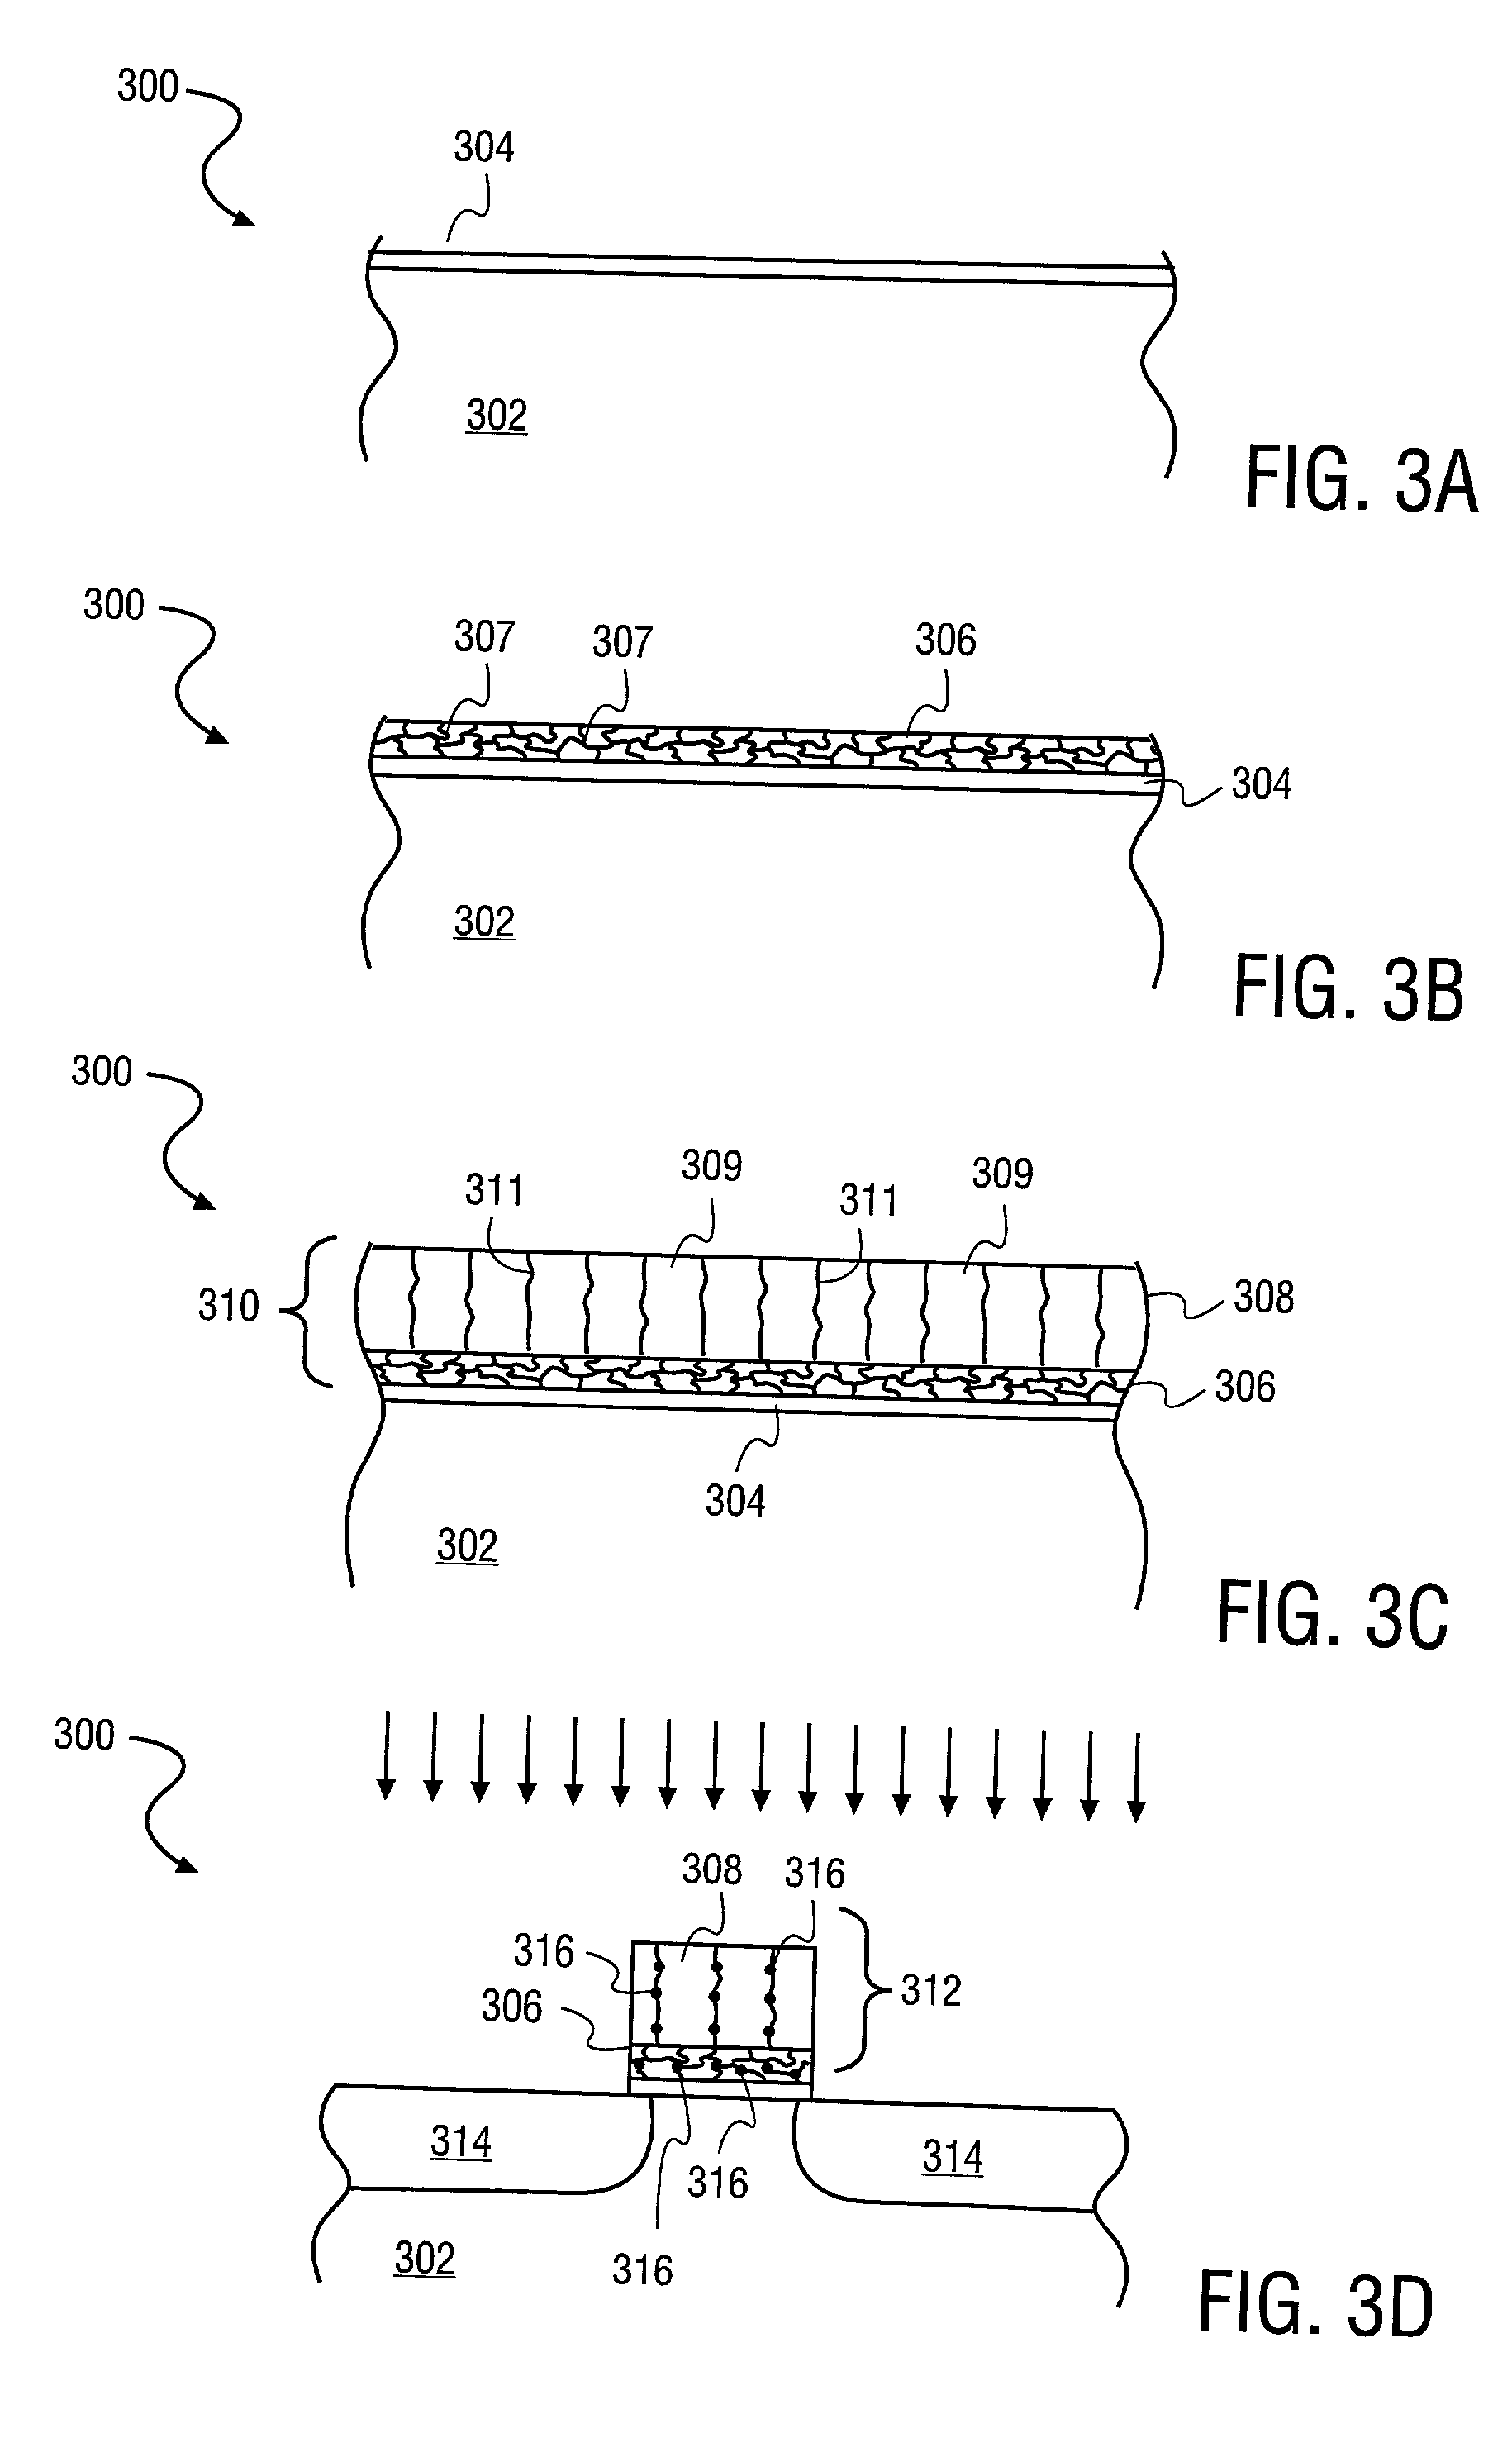 Bi-layer silicon film and method of fabrication